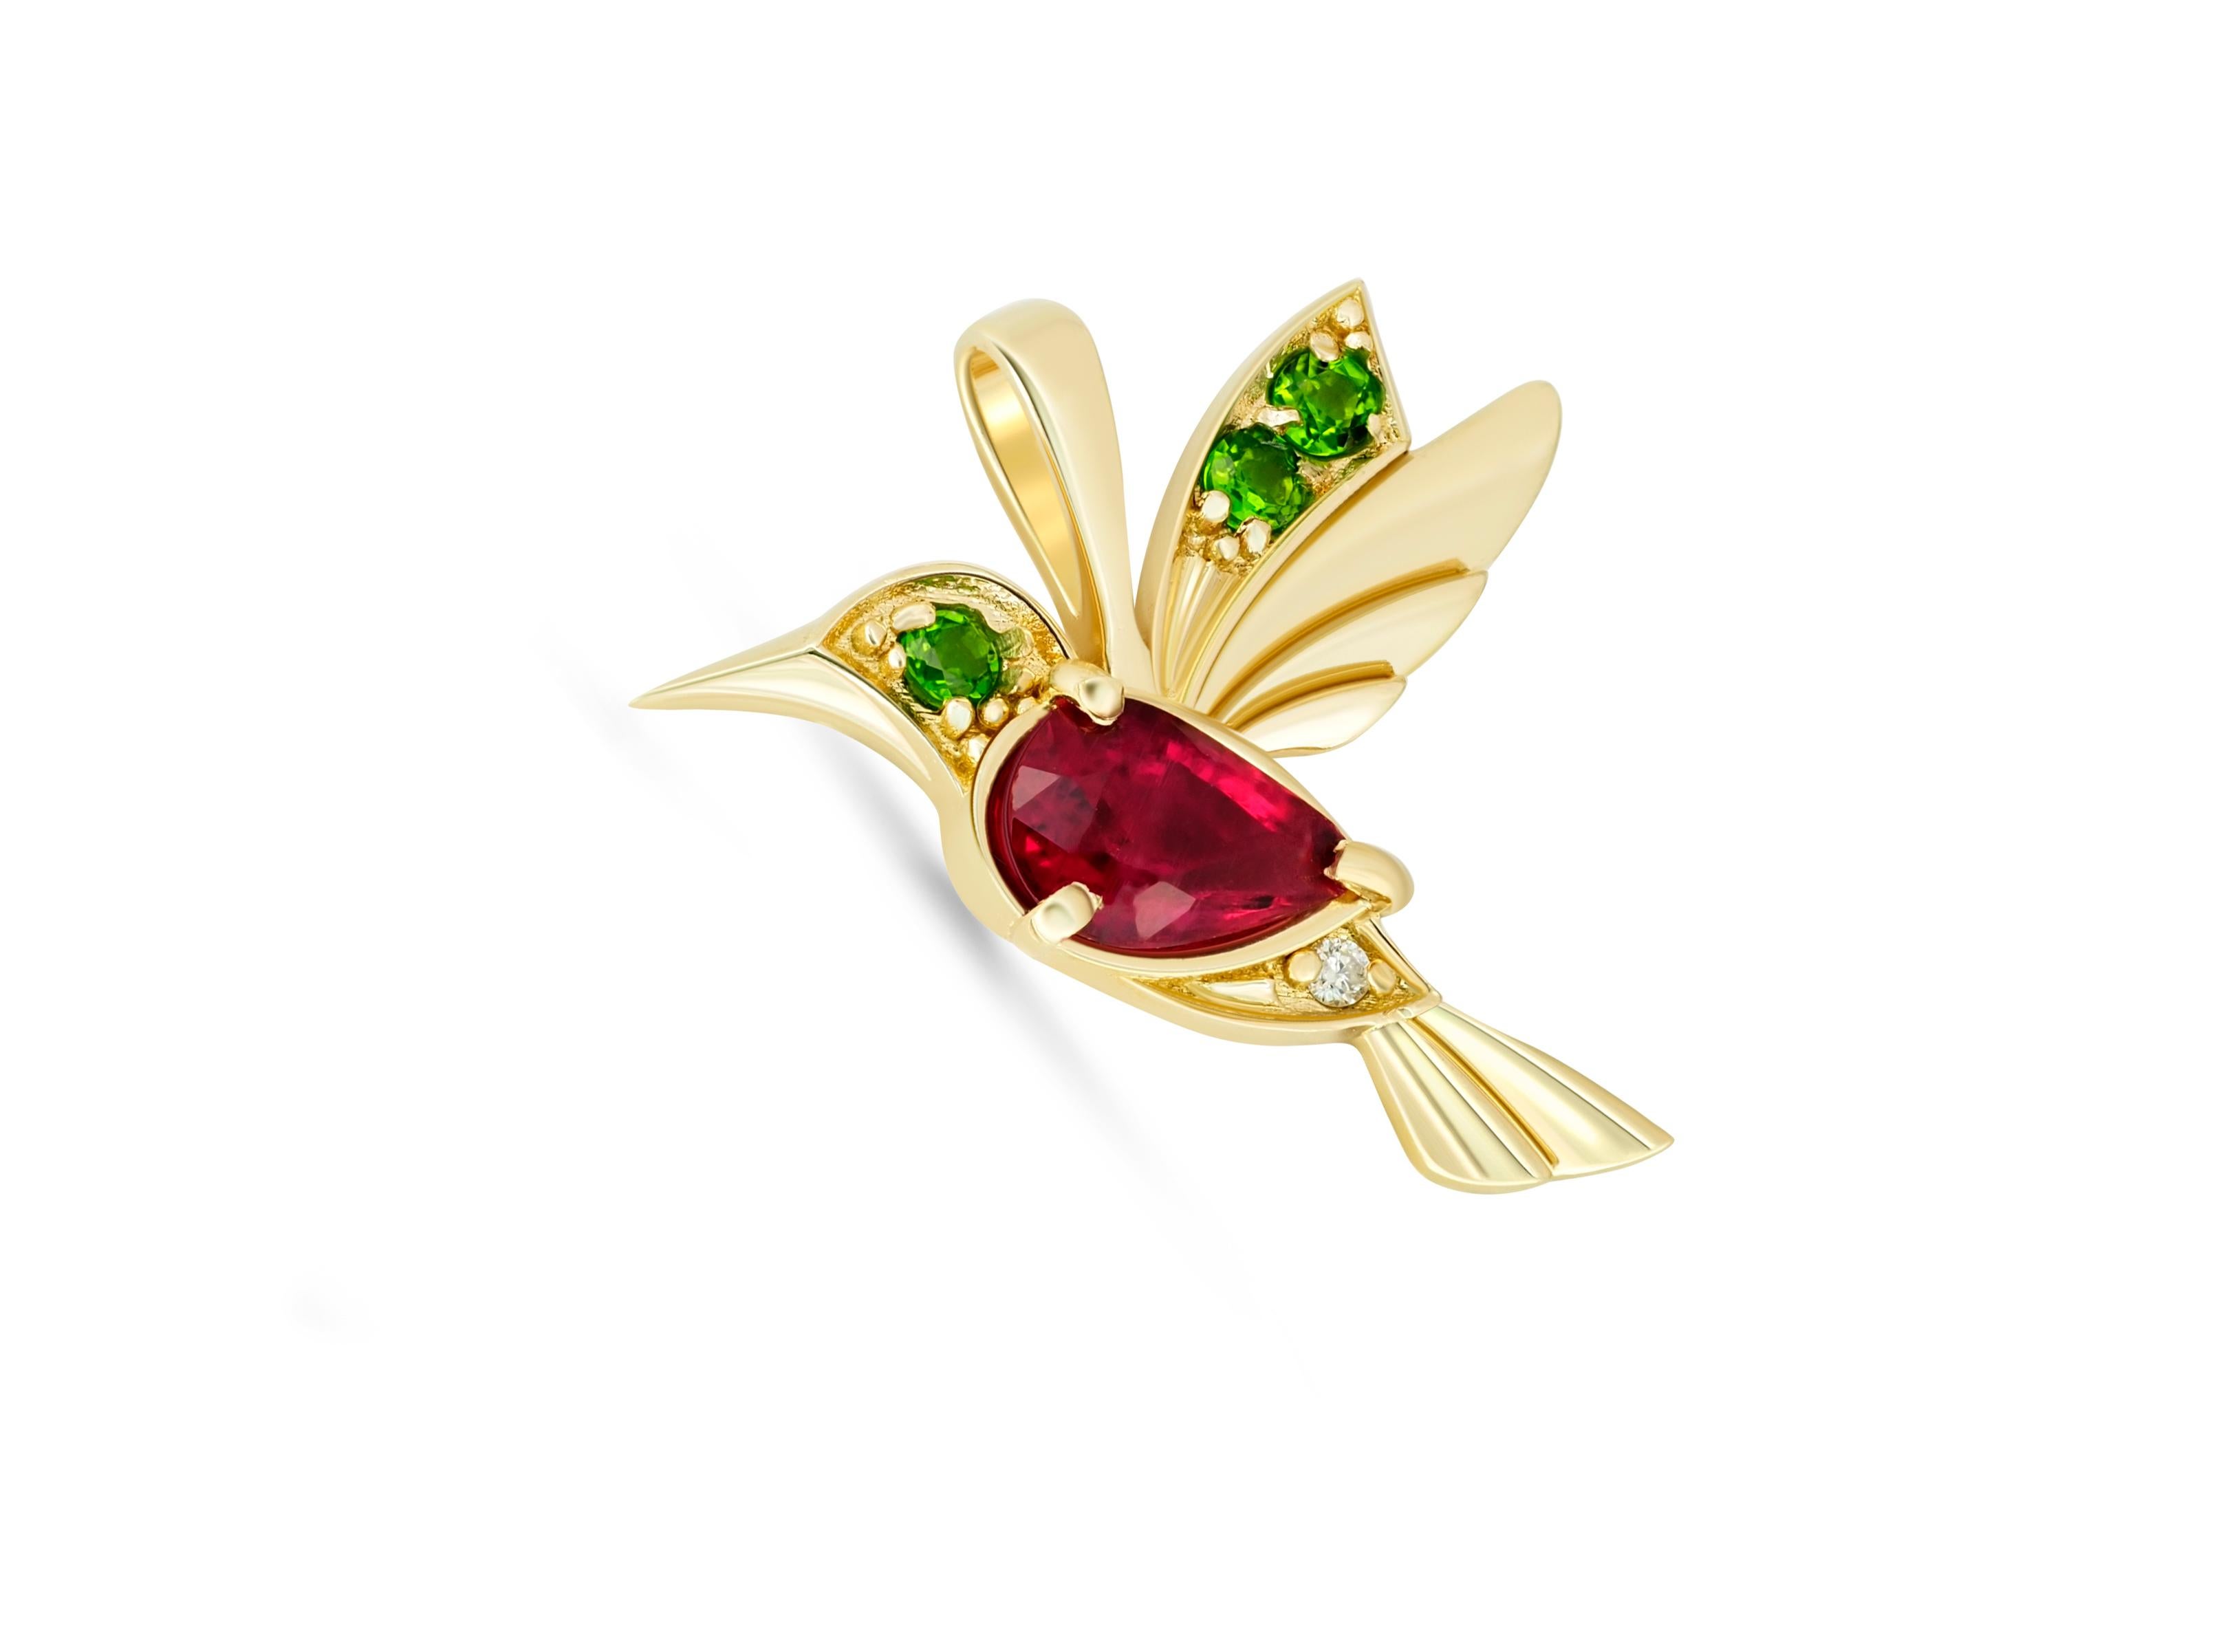 Pear Cut Hummingbird earings studs with rubies.  For Sale